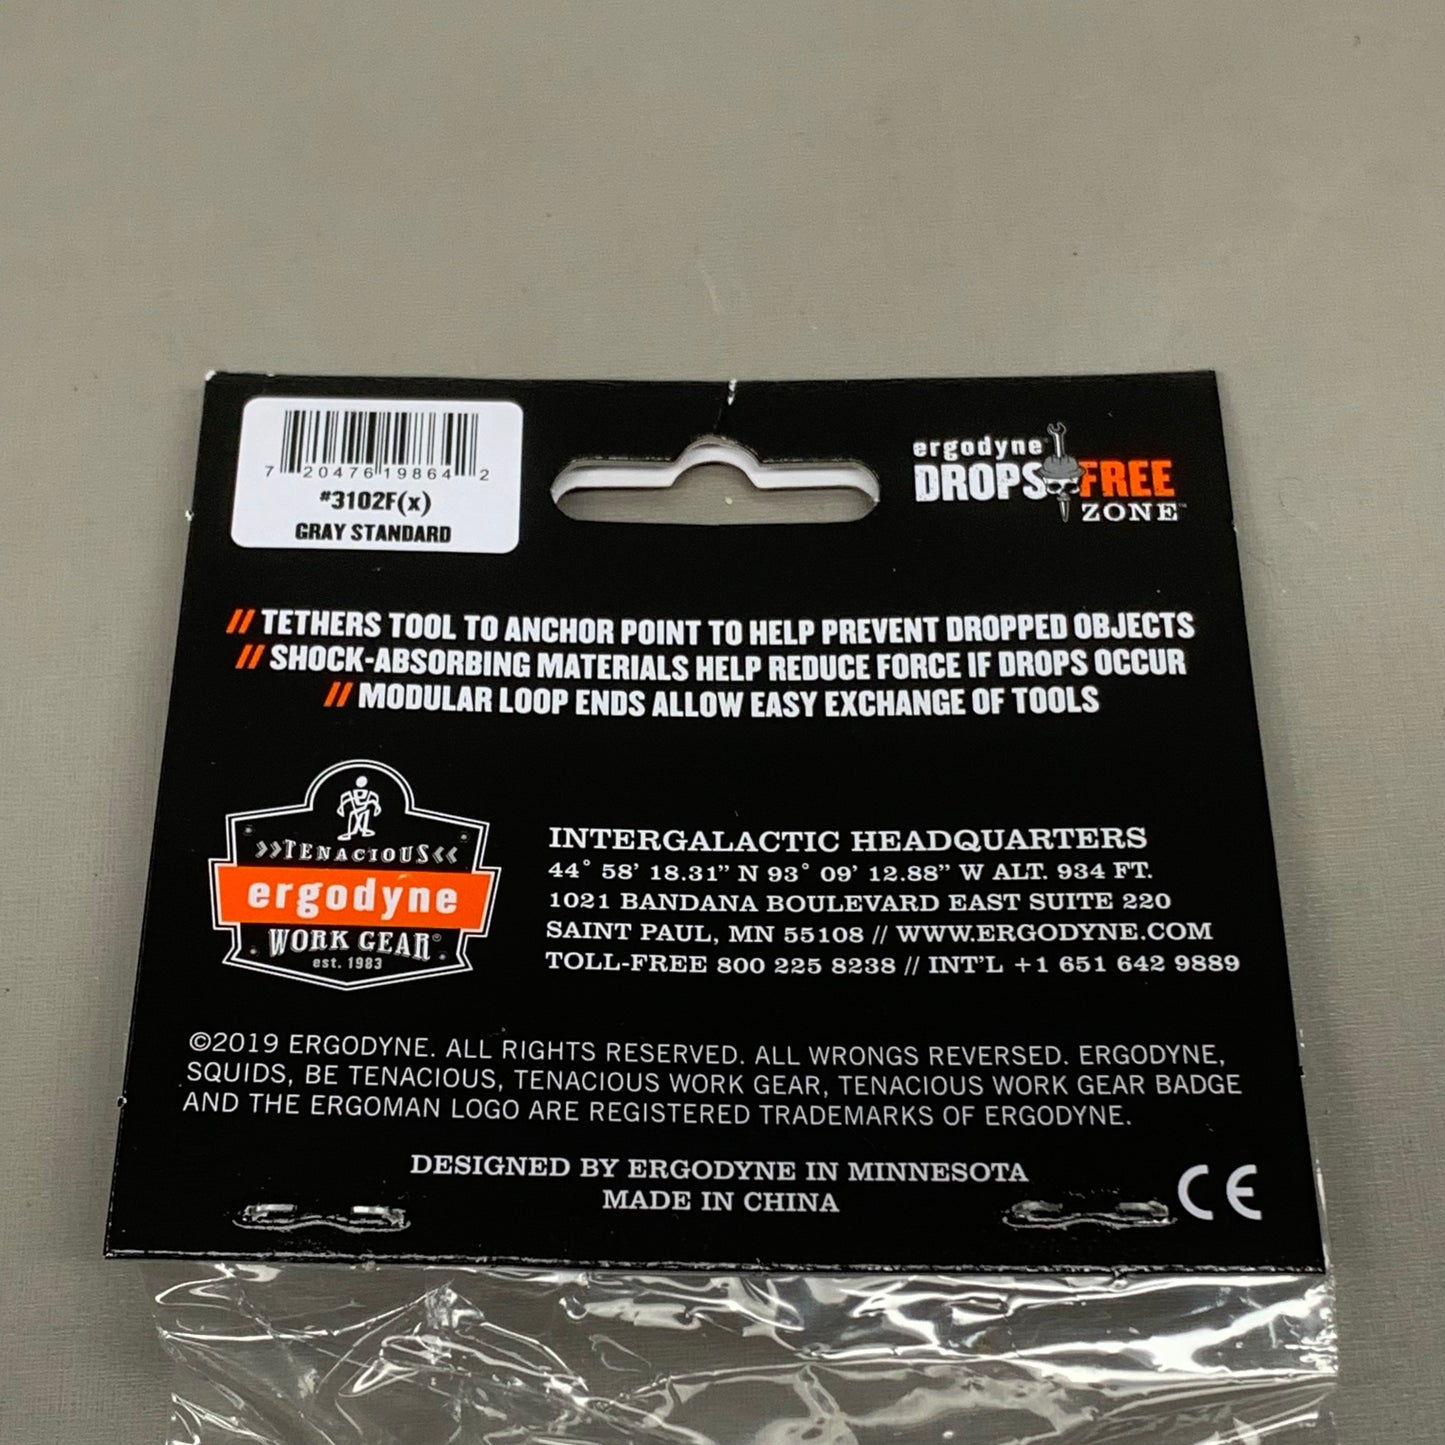 ERGODYNE Squids Tool Tethering Kit Tether Up To 4 5lb Tools 3181 (New)